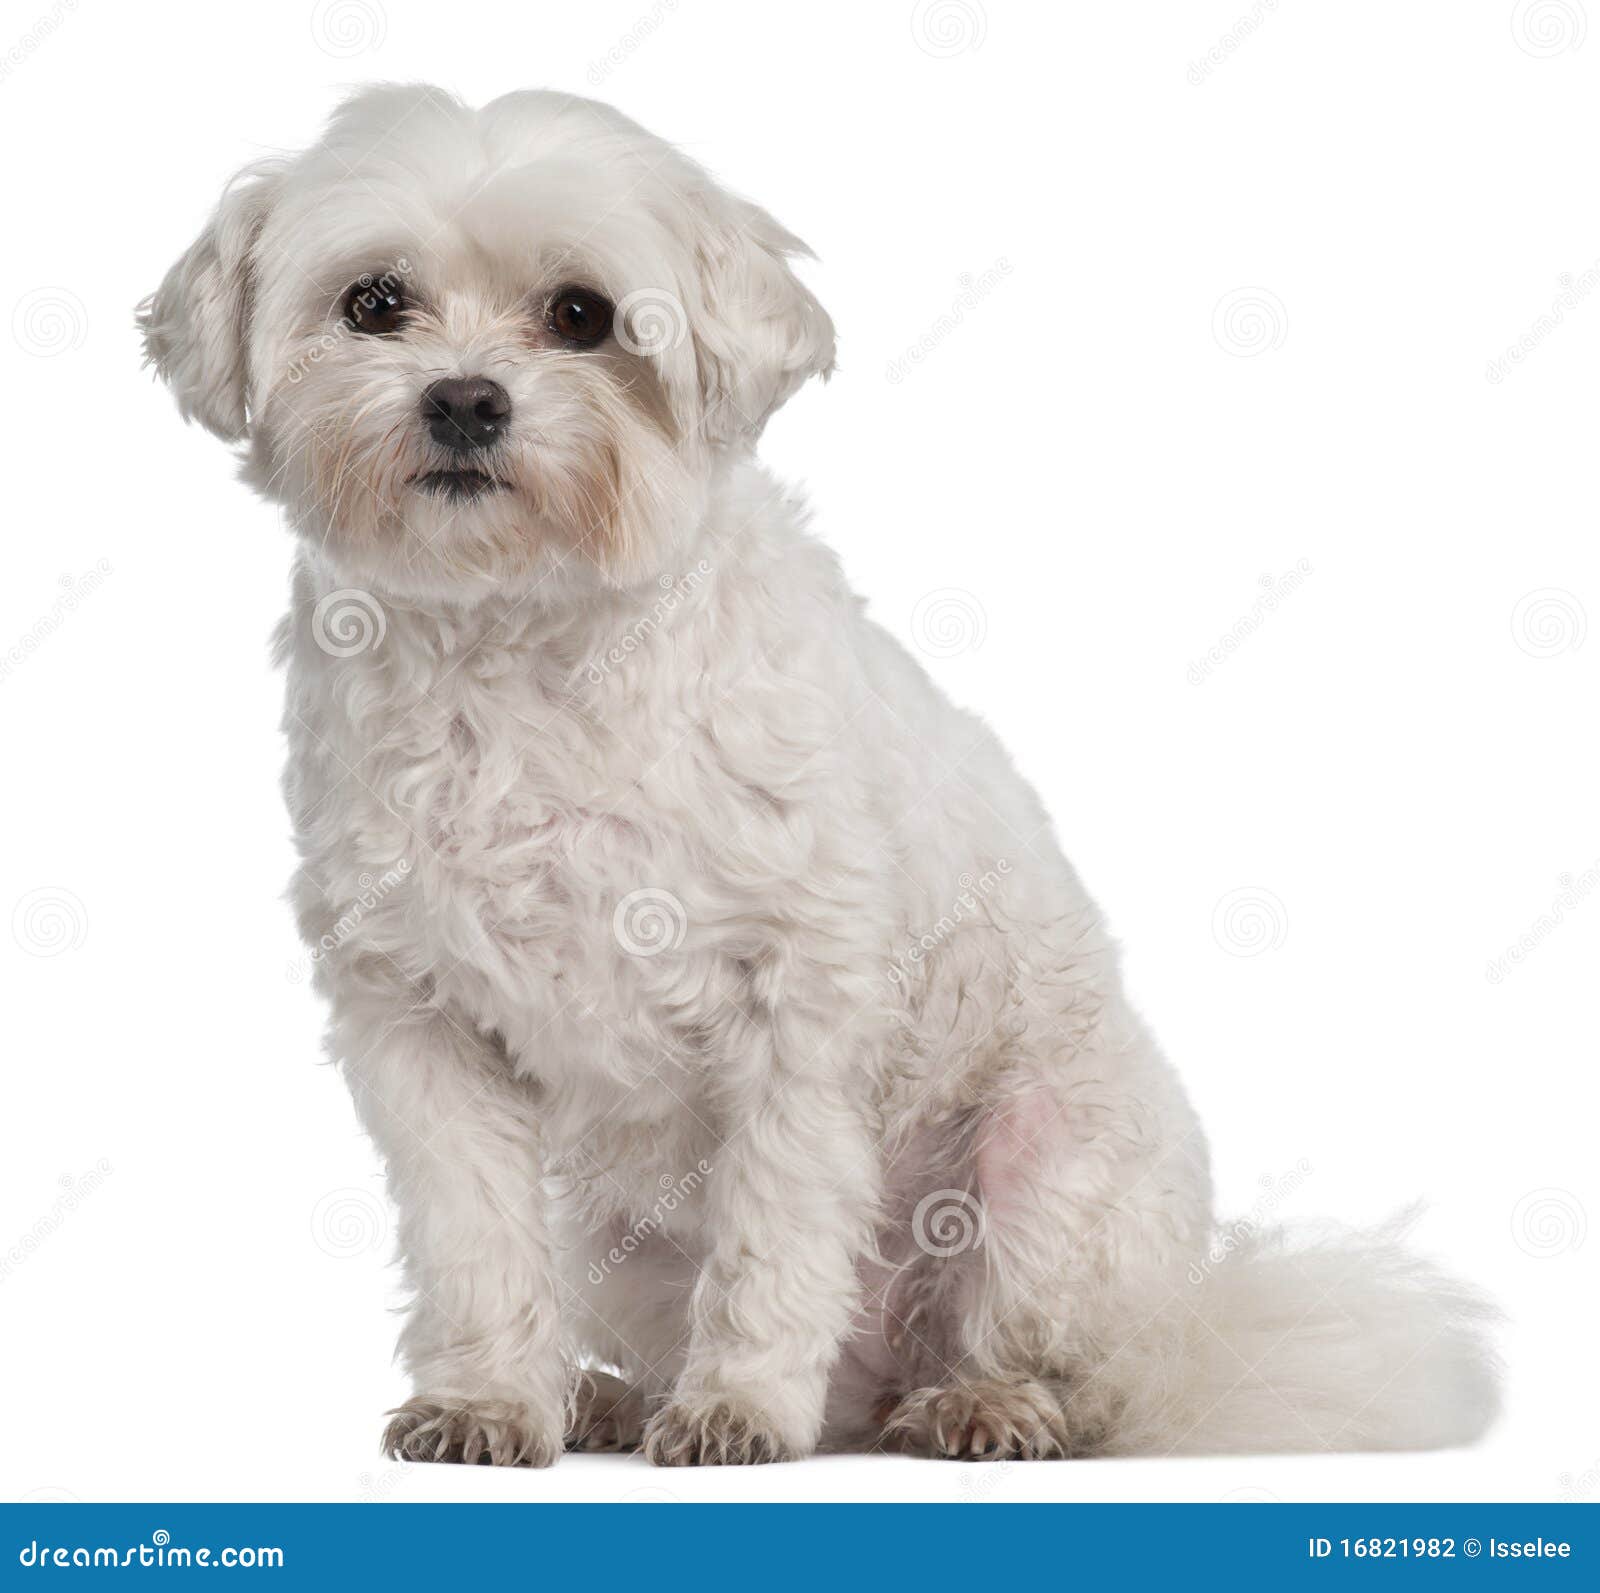 coton de tulear, 7 years old, sitting